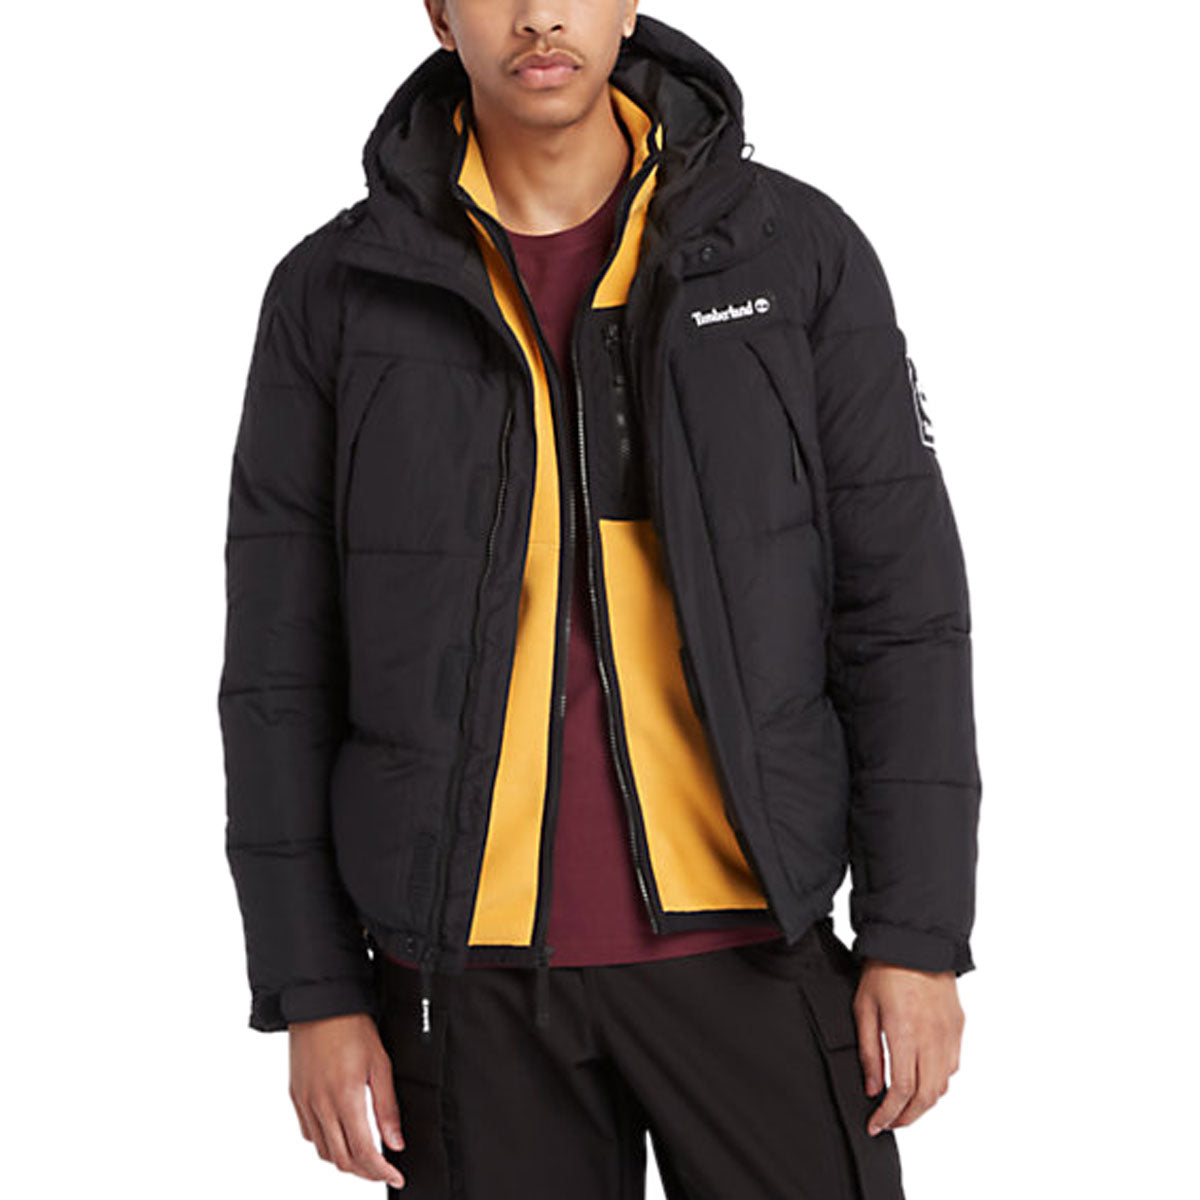 Timberland DWR Outdoor Archive Puffer Jacket - Black image 1